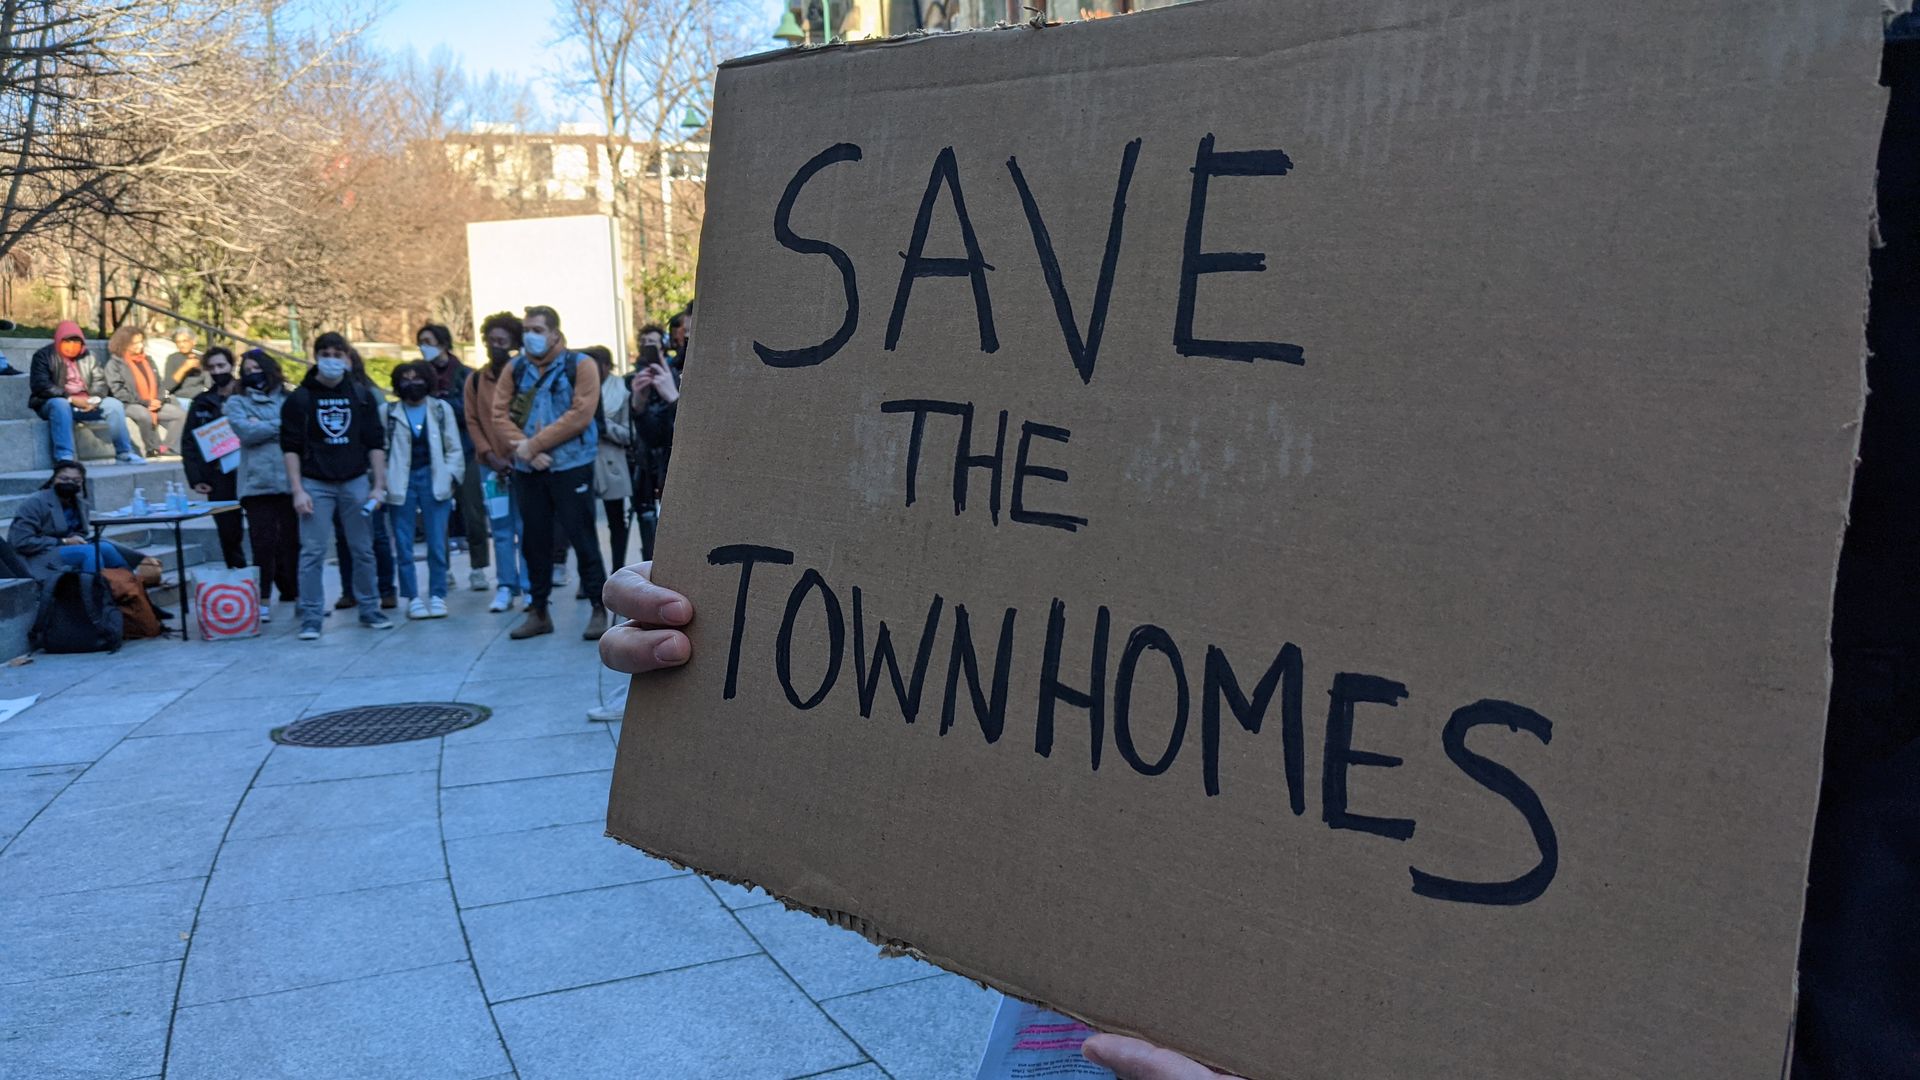 A demonstrator holding a sign saying to "Save the Townhomes."